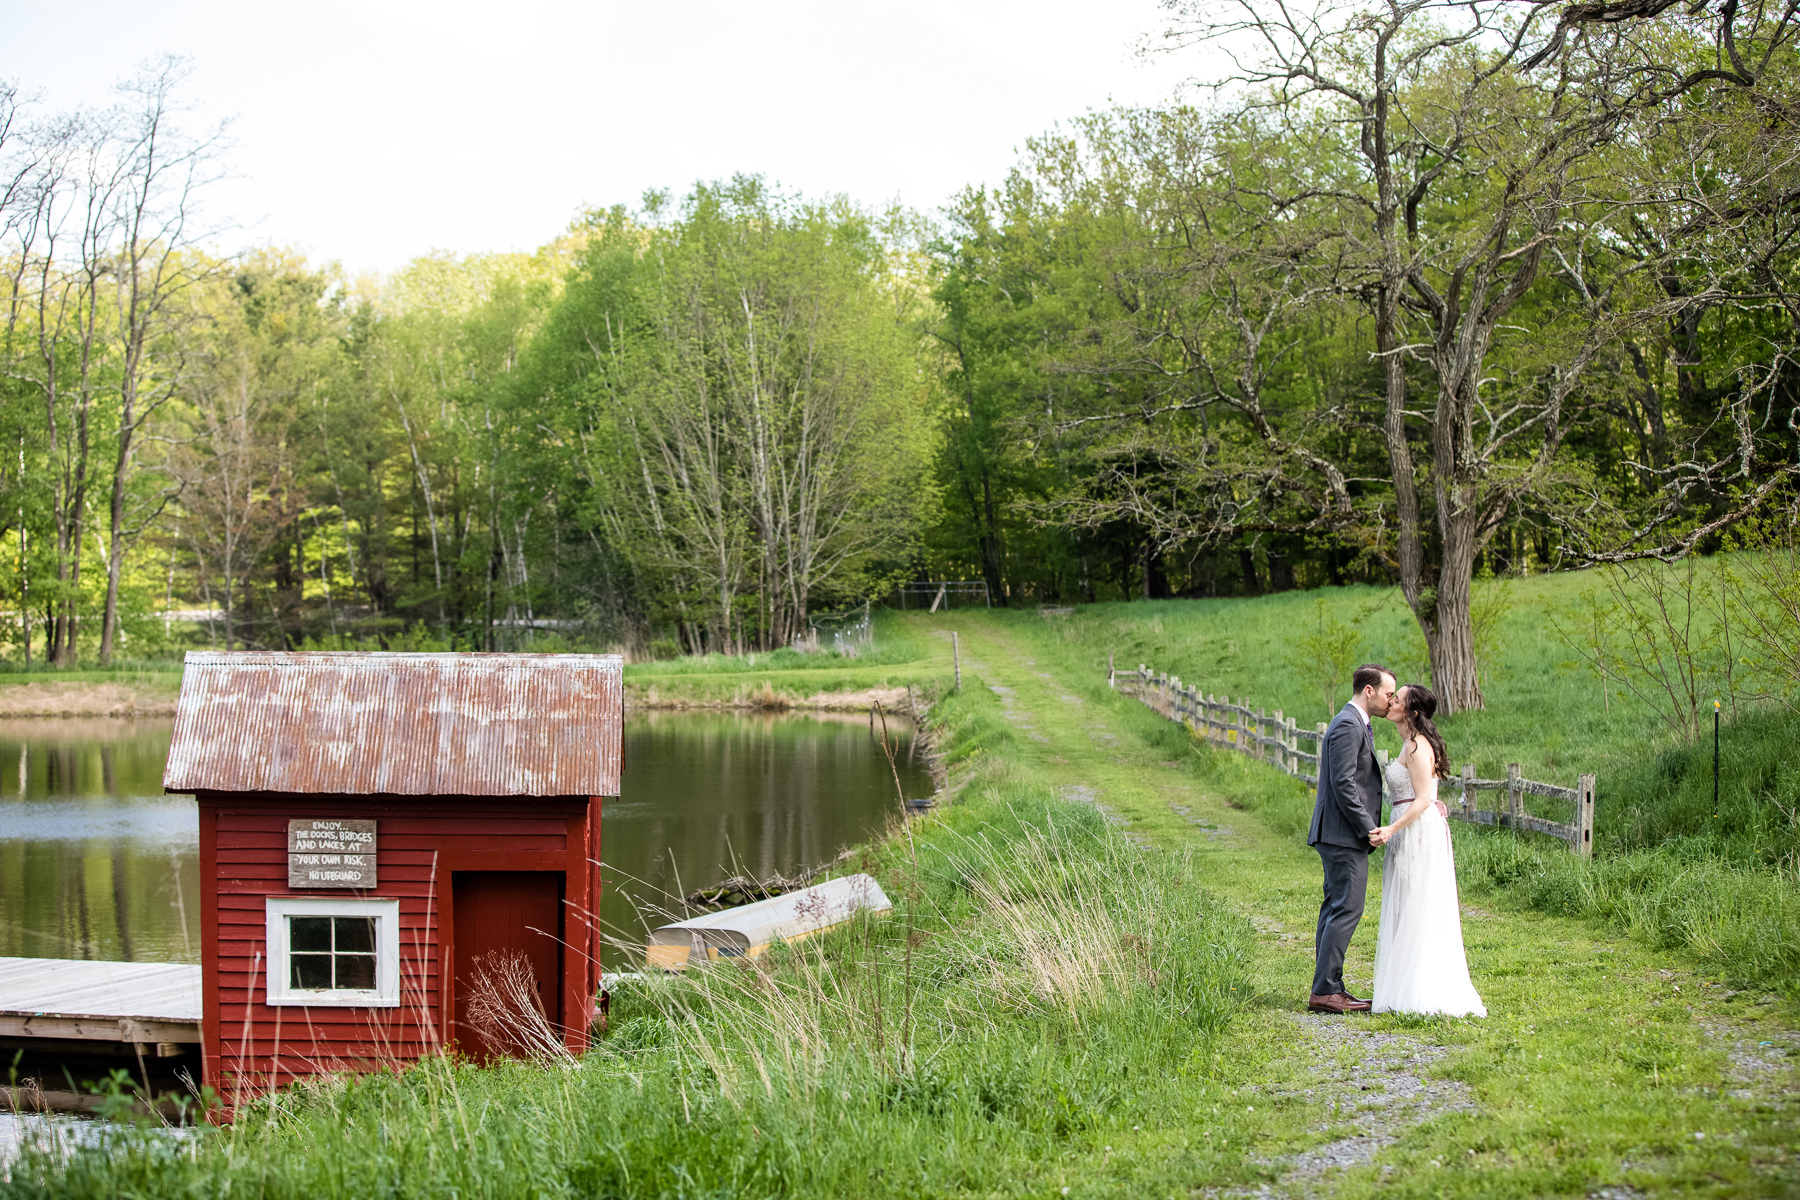 The bride and groom sharing a kiss in front of the pond at Blenheim Hill Farm